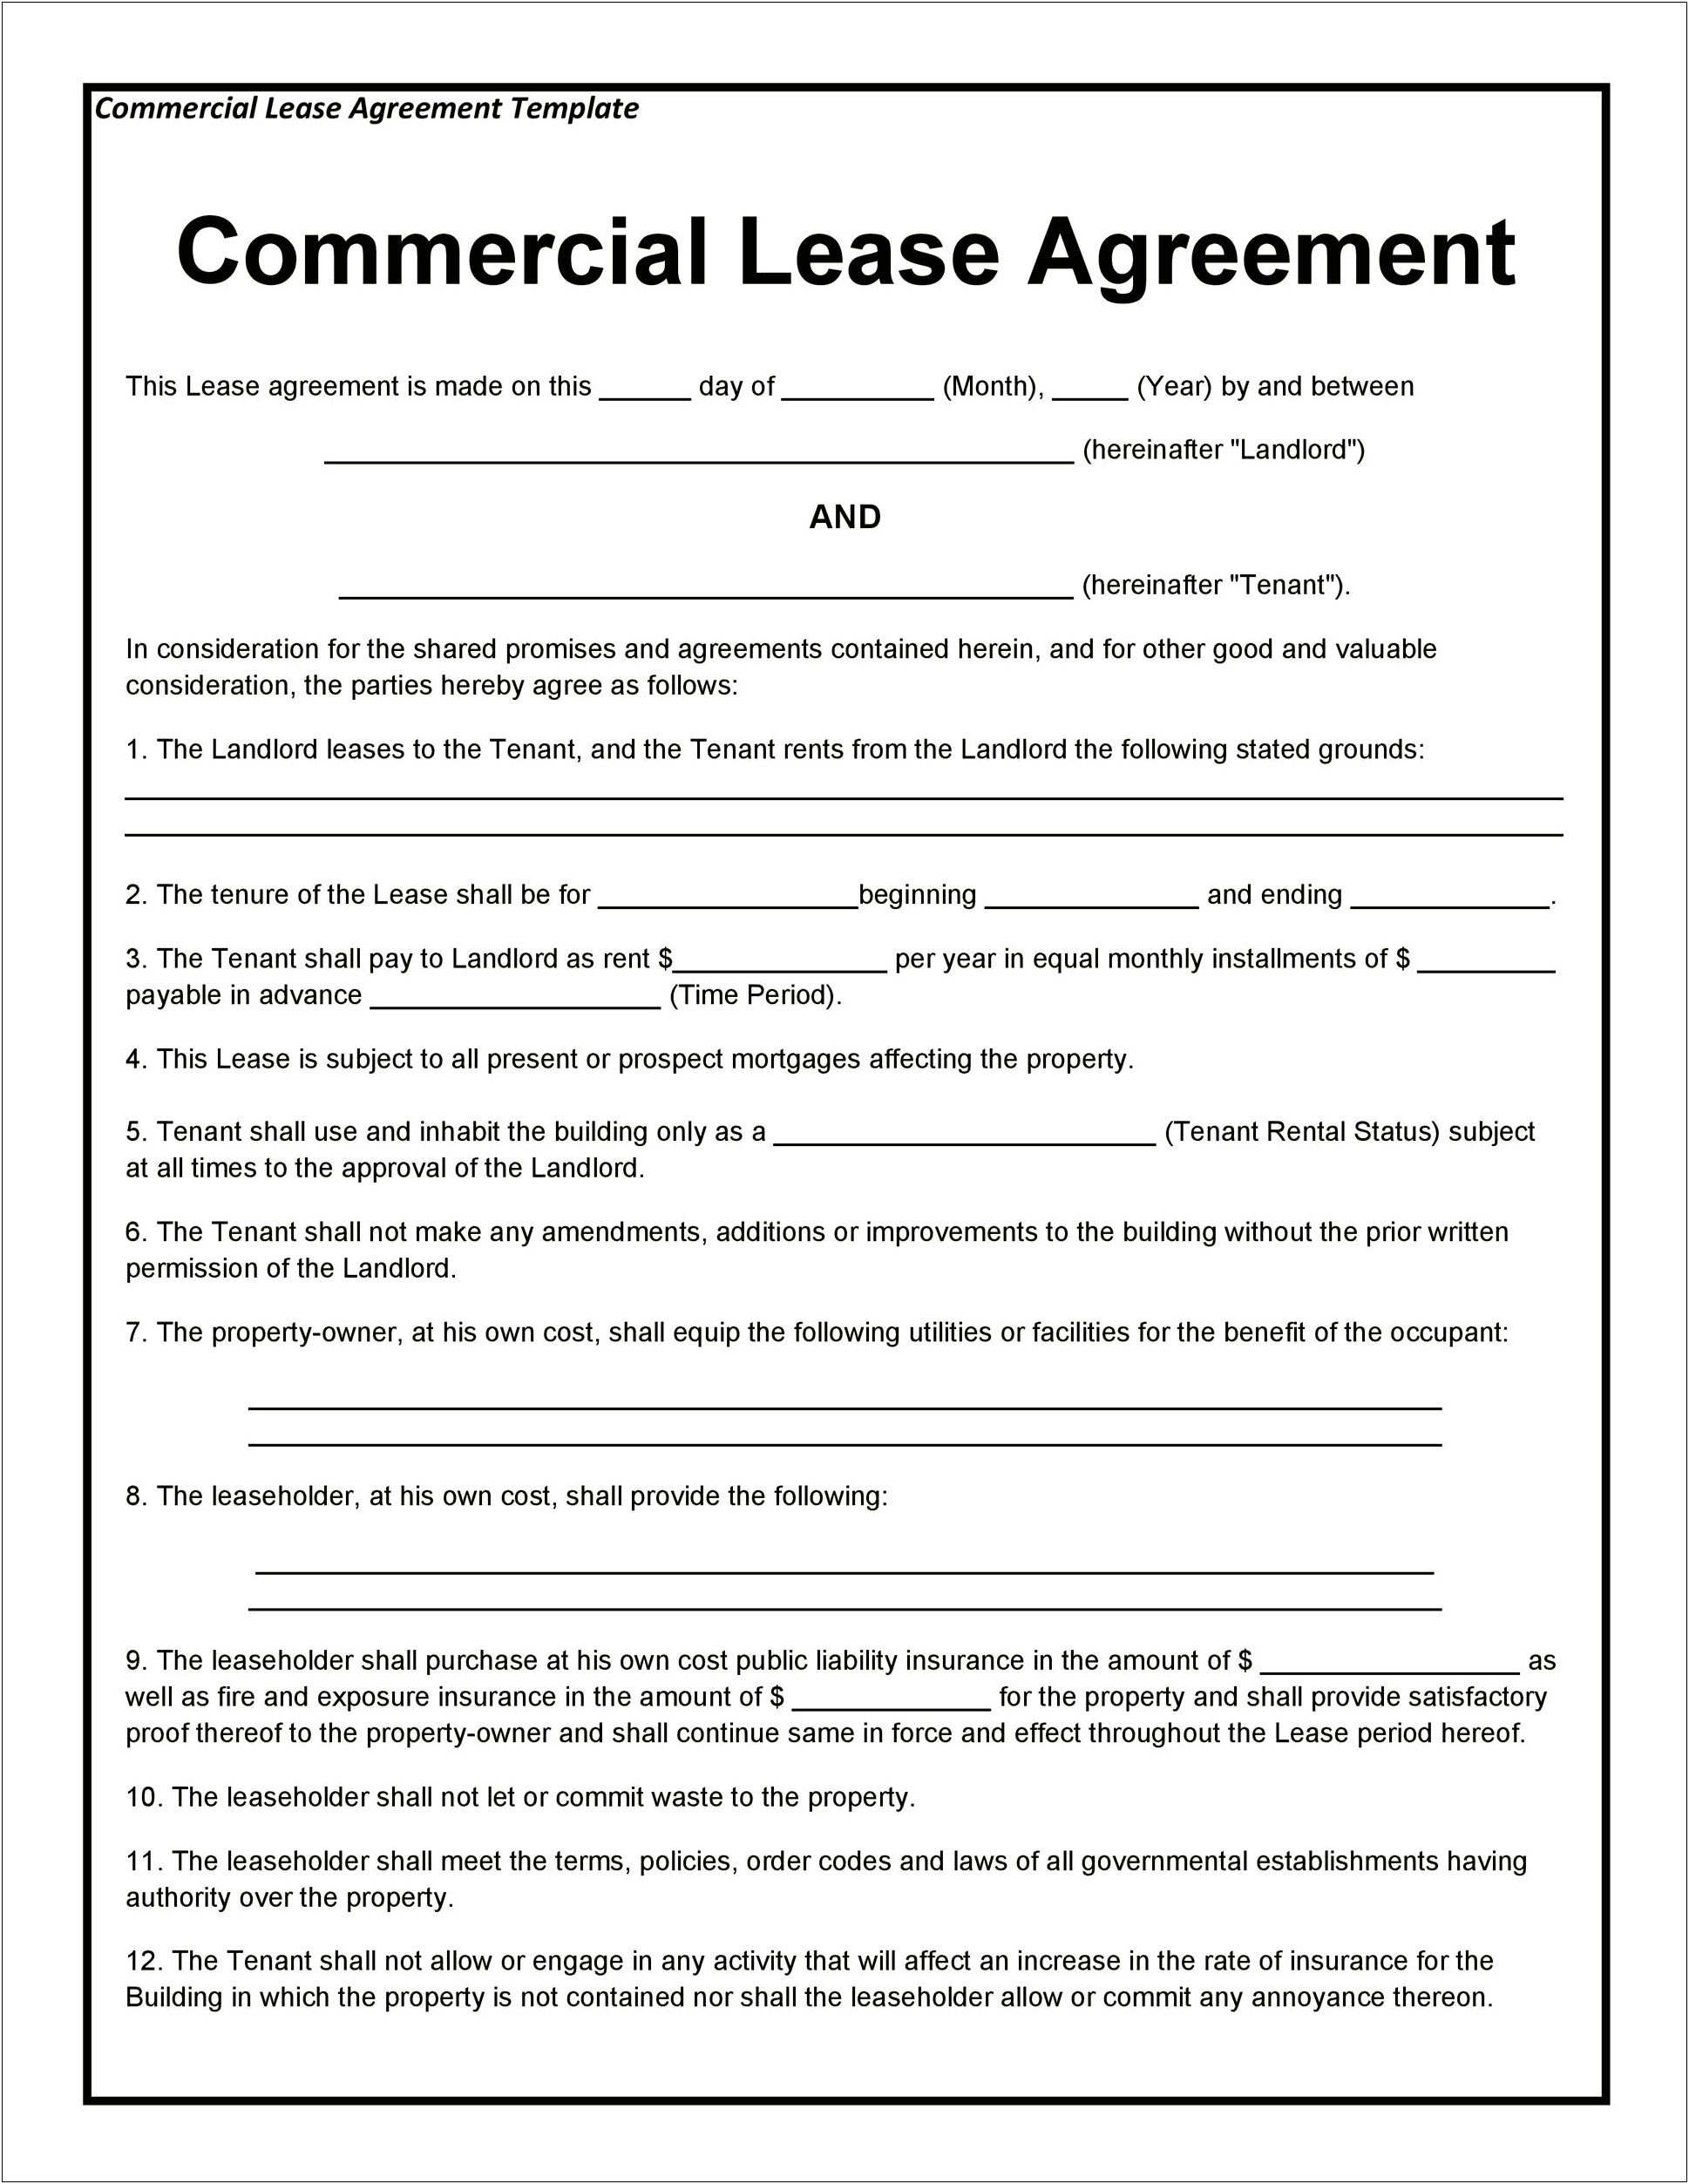 Commercial Lease Agreement Template Free Pdf